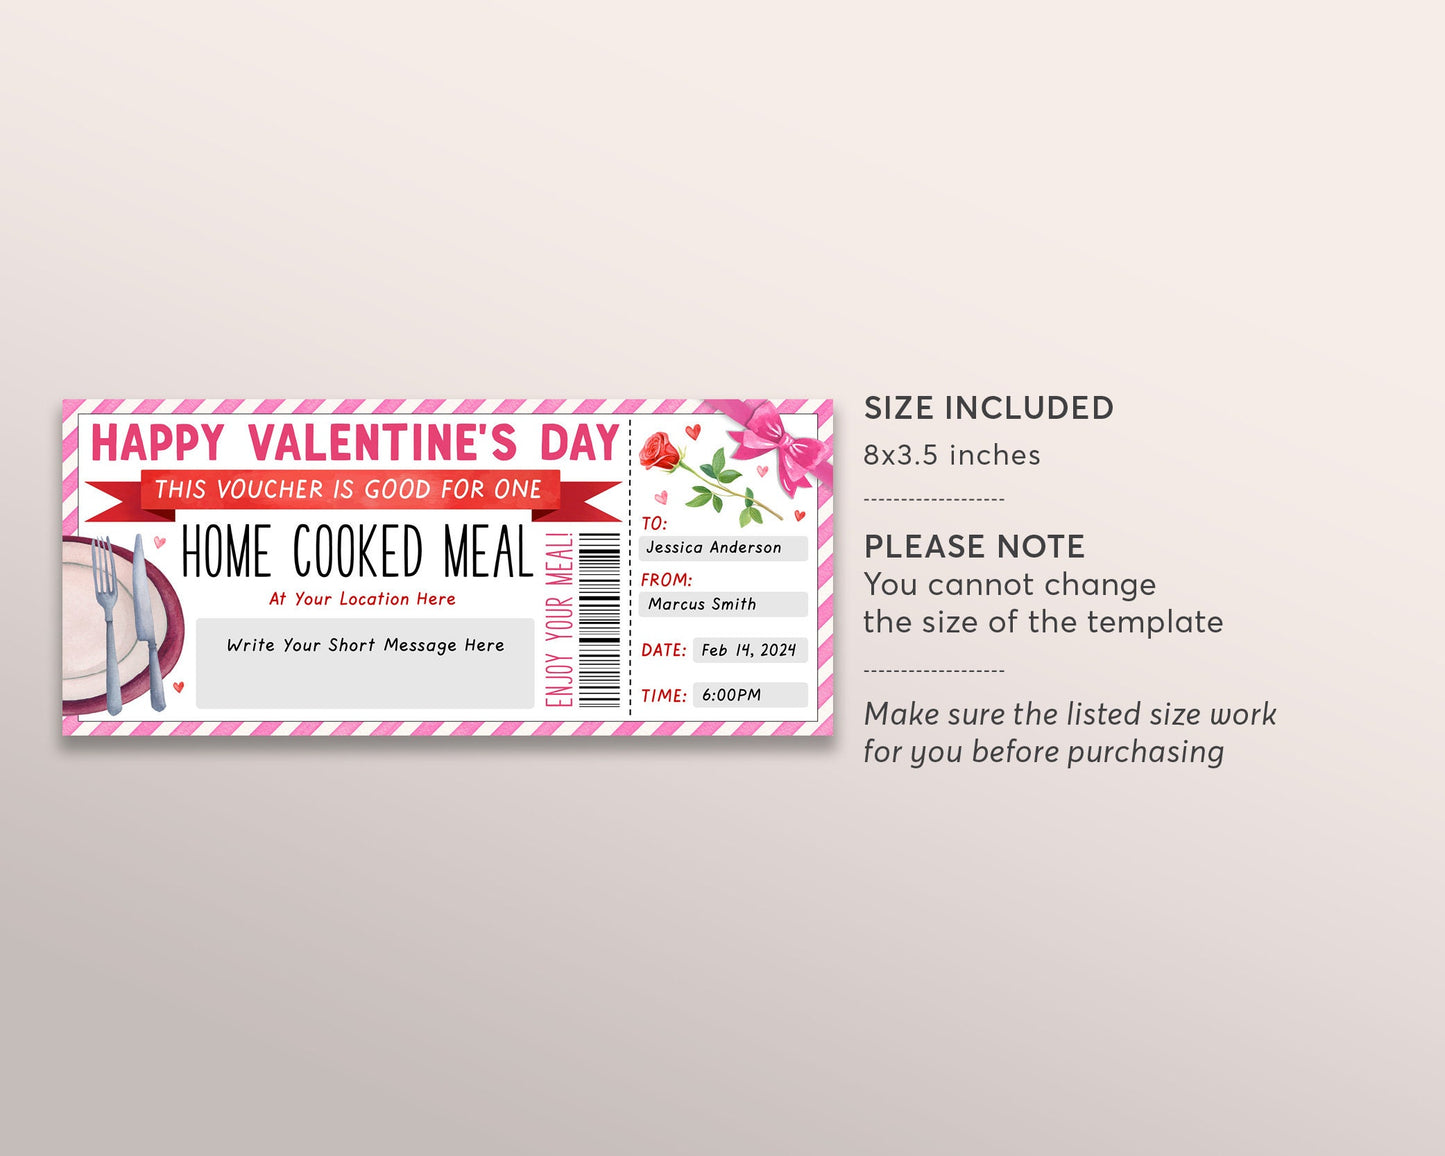 Valentines Day Home Cooked Meal Coupon Editable Template, Surprise Personal Chef Experience Dinner Gift Voucher, Dining Gift Certificate